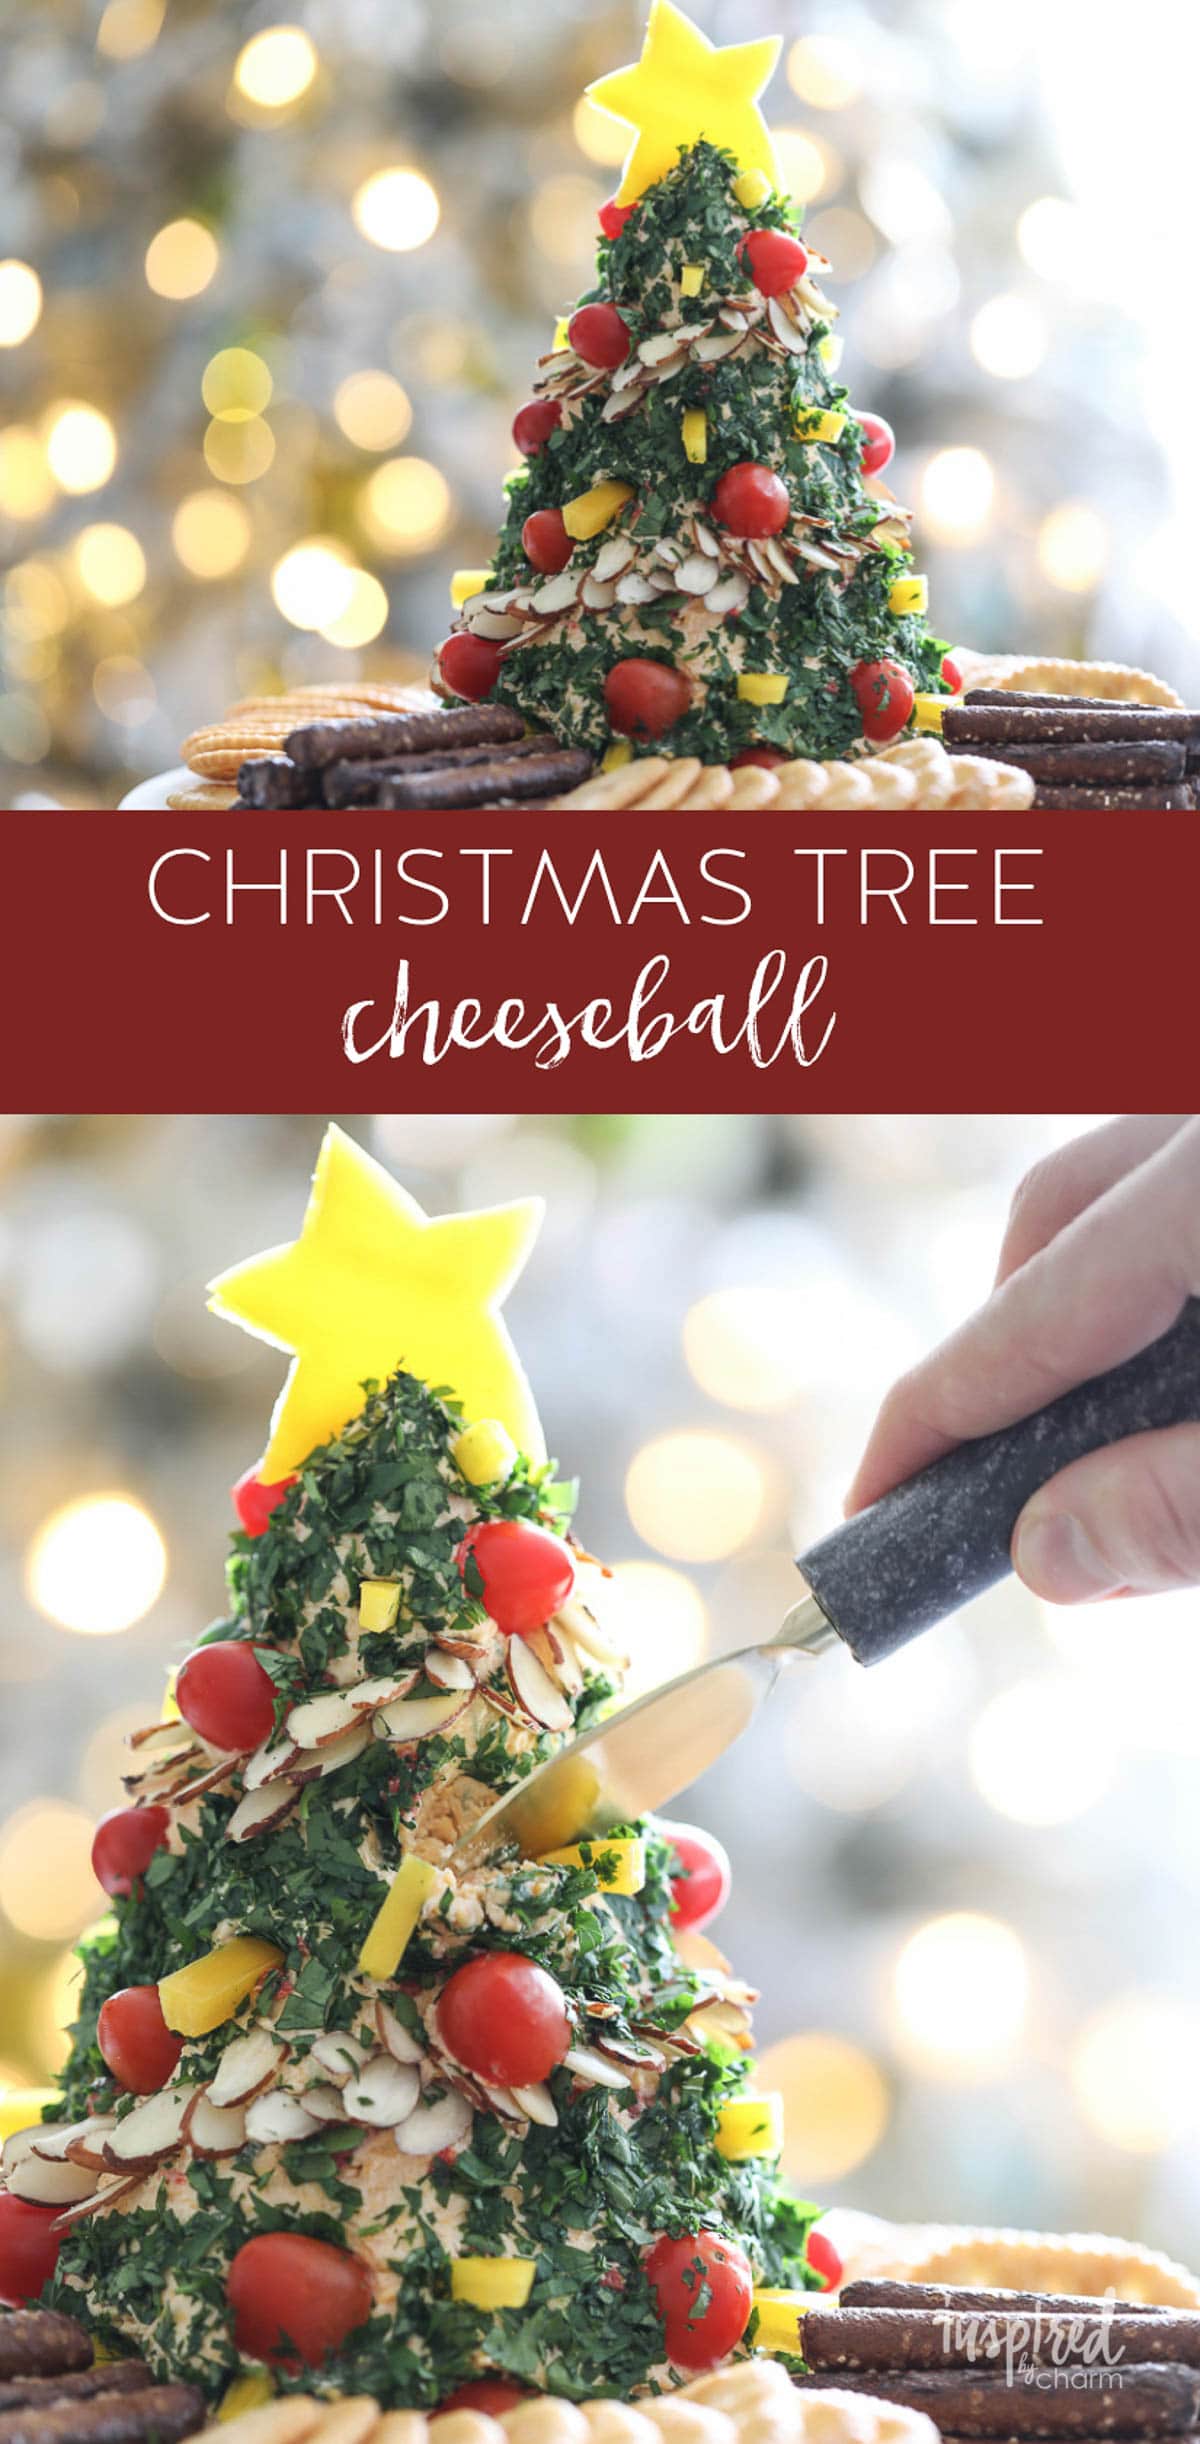 Holiday Appetizer Recipe - Christmas Tree Cheese Ball #christmas #tree #cheeseball #snack #recipe #holiday #appetizer